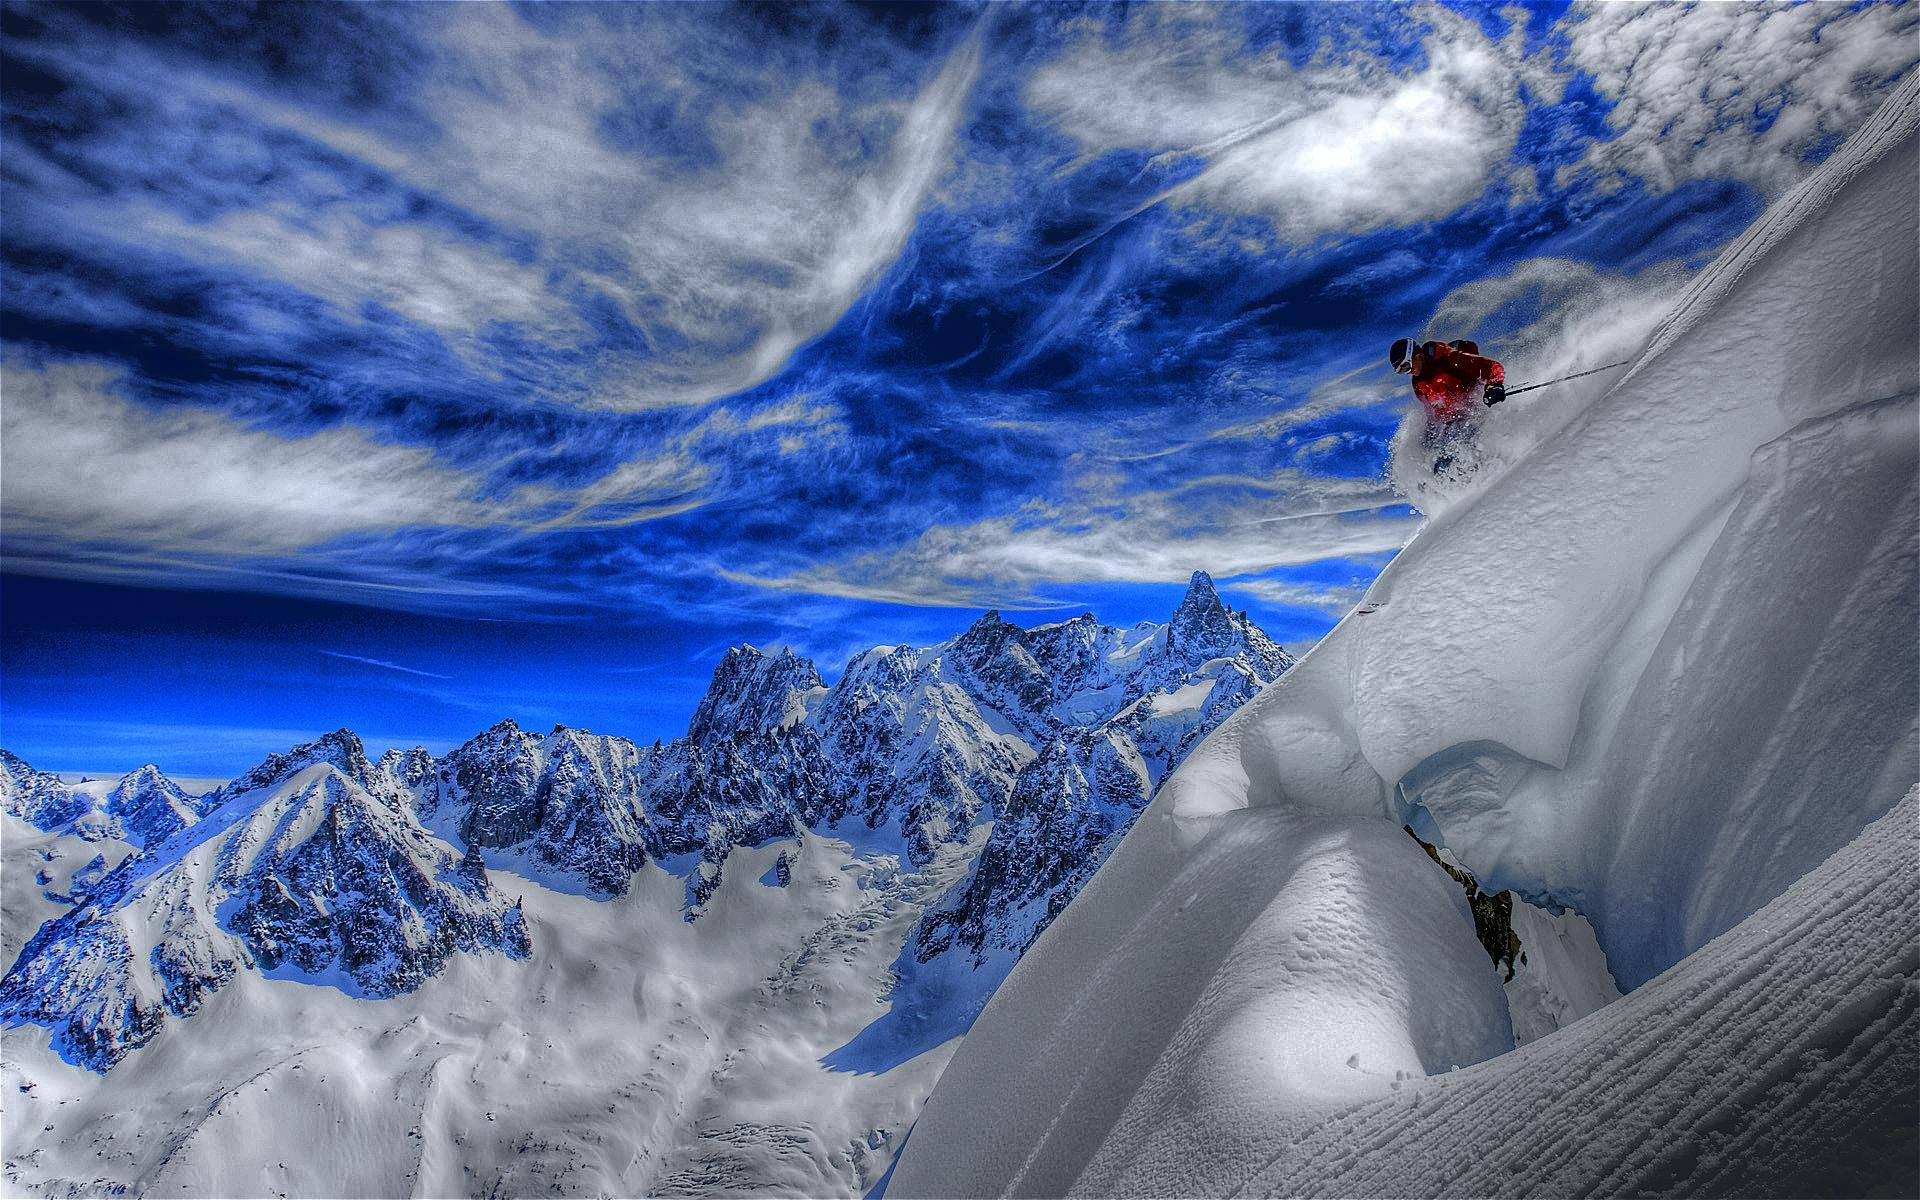 Caption: A Breathtaking View Of Snow Mountain Skiing